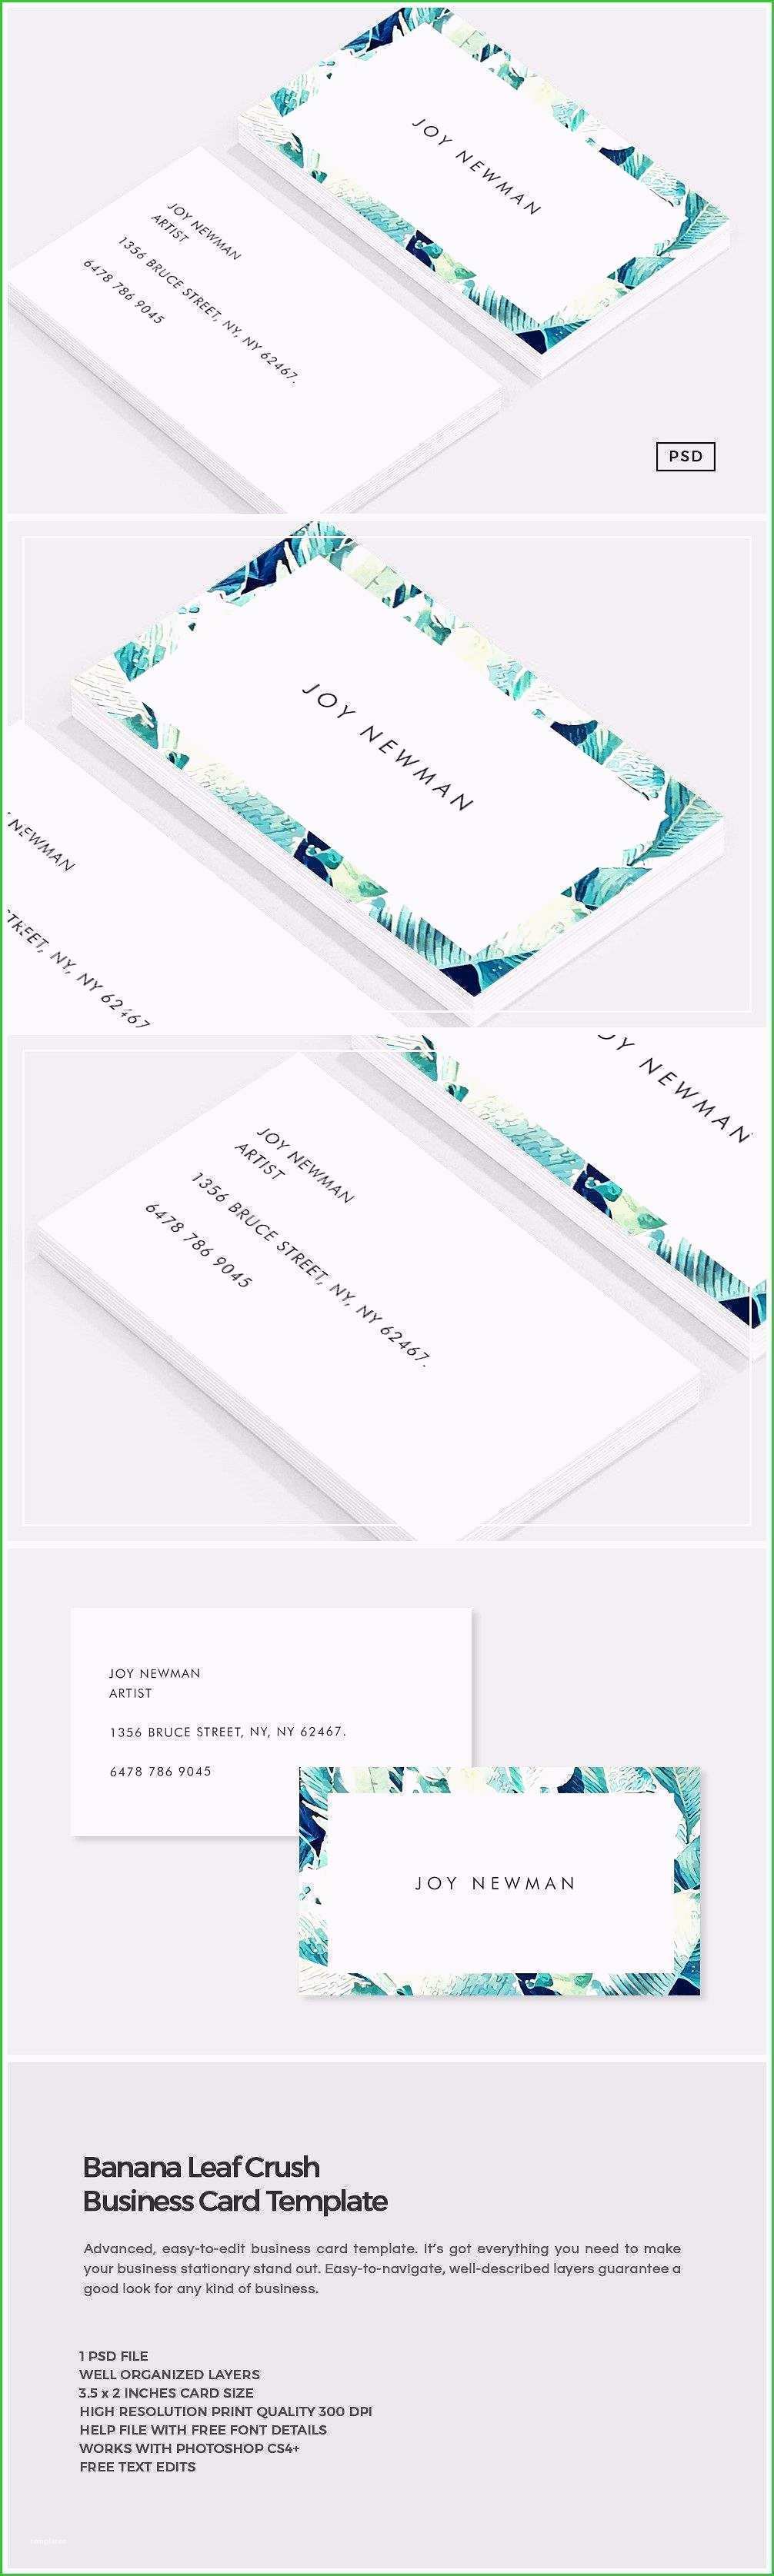 23 Printable Credit Card Size Template For Word in Photoshop for In Credit Card Size Template For Word